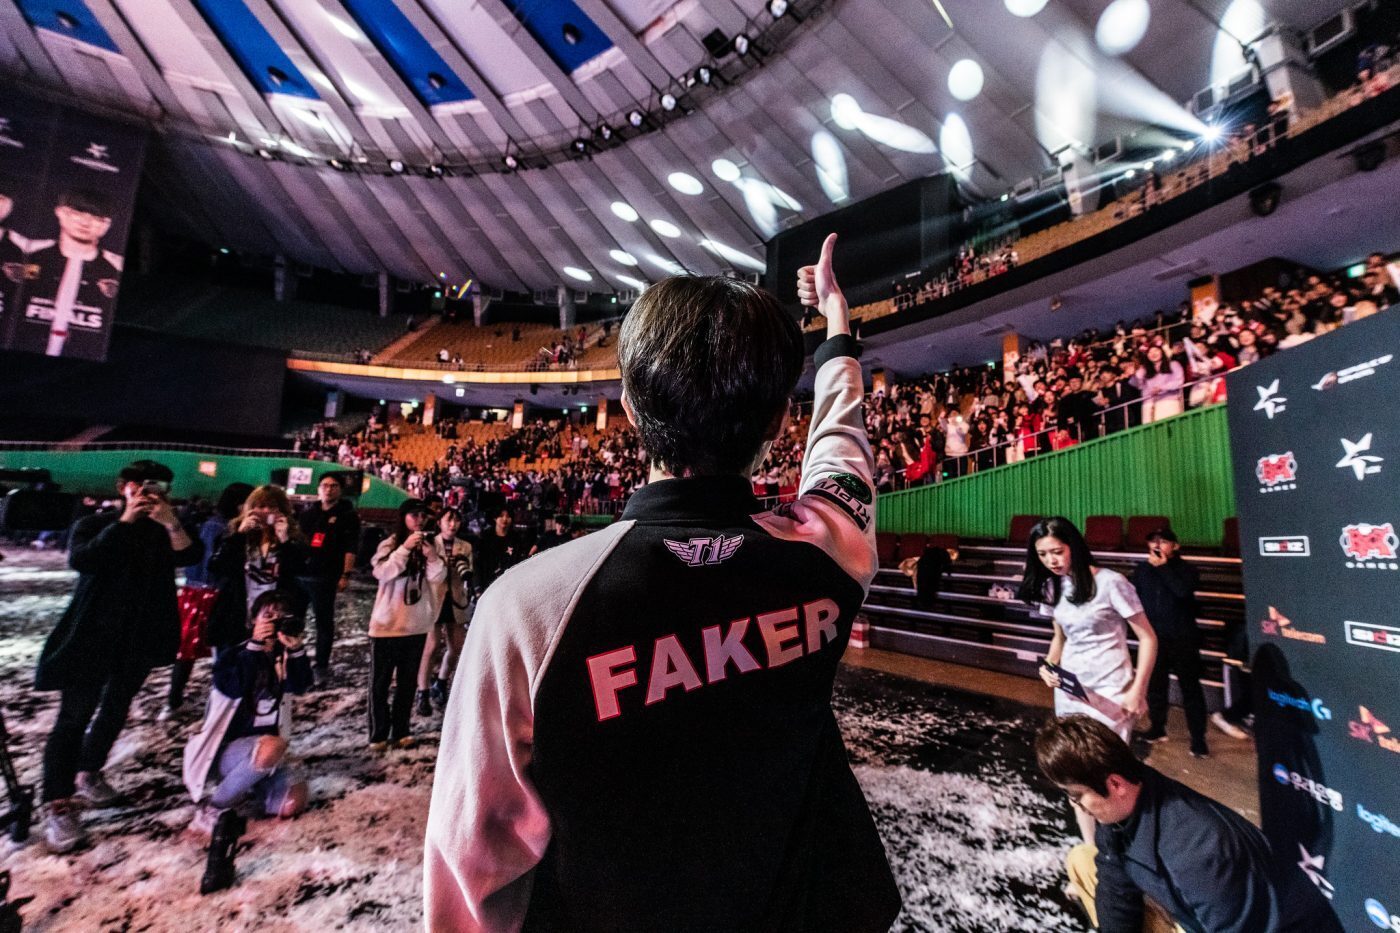 Sang-hyeok “Faker” Lee and SK Telecom T1 return to the LCK as defending champions. For Faker, it’s the seventh time he’s had to defend his Korean throne, and perhaps this season will be the hardest yet. Image via Riot Games.